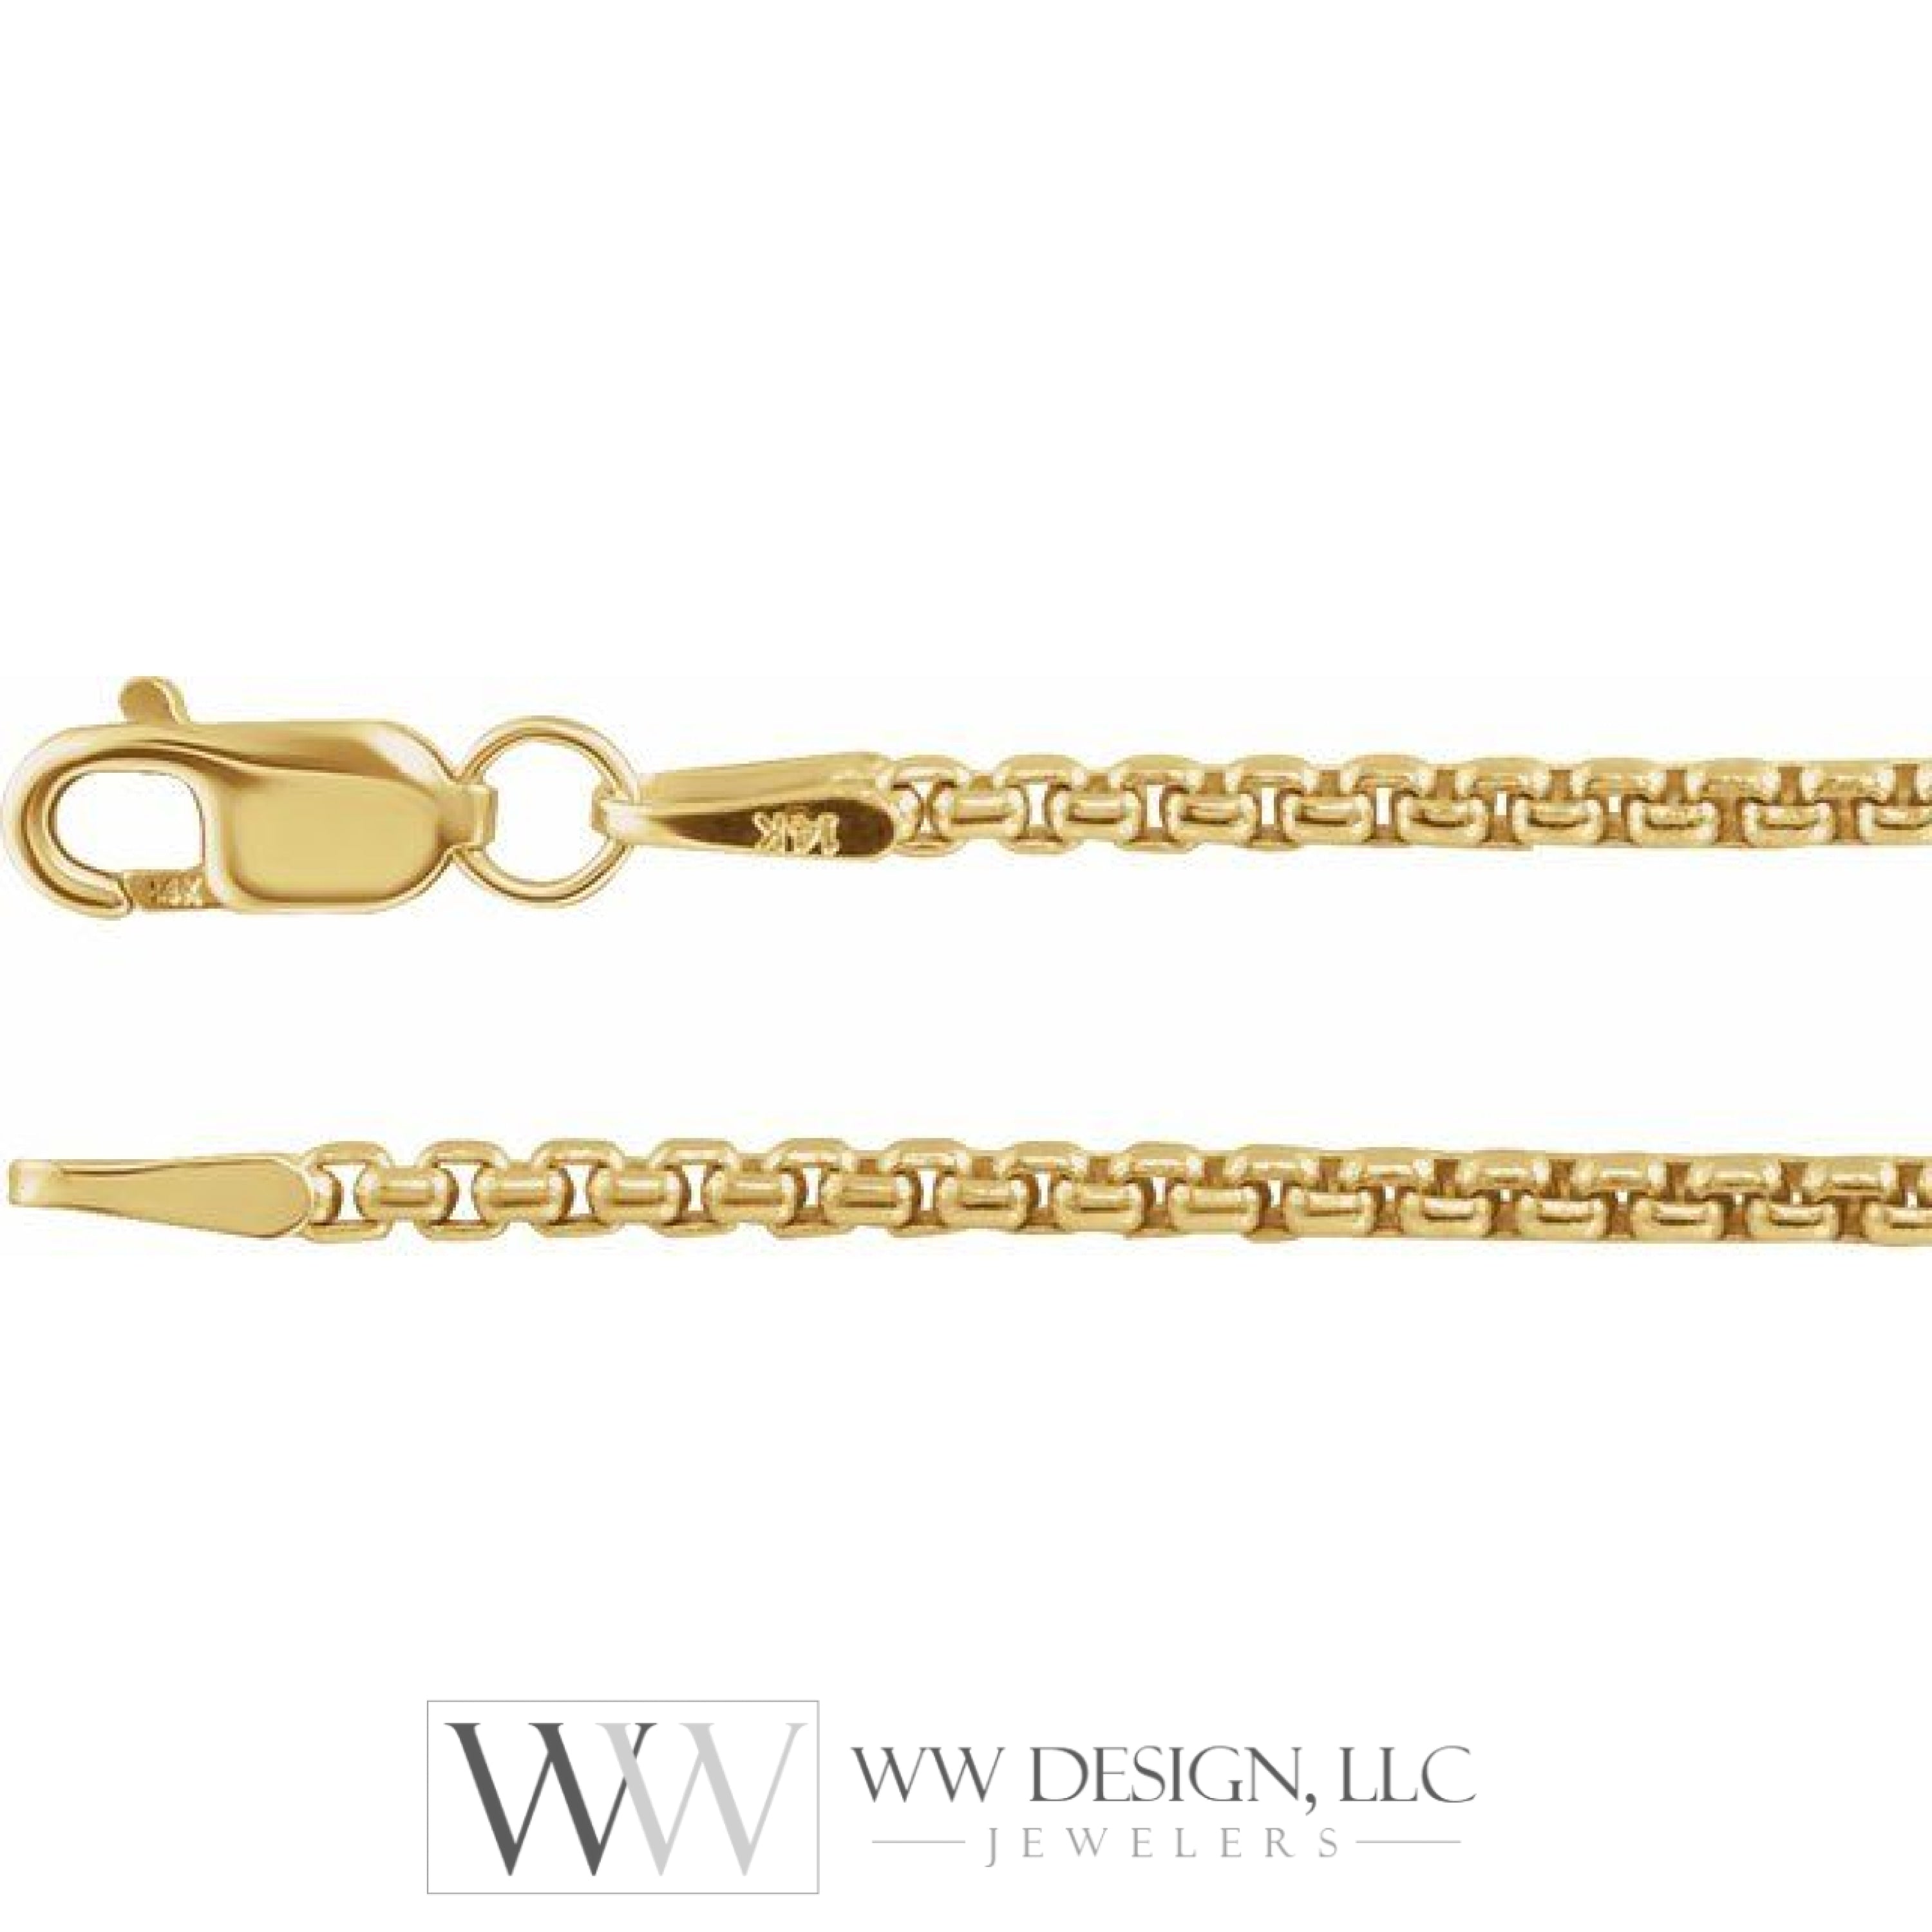 1.8mm Rounded Box Chain Bracelet or Necklace - 14k Gold (Y, W, R), or Sterling Silver